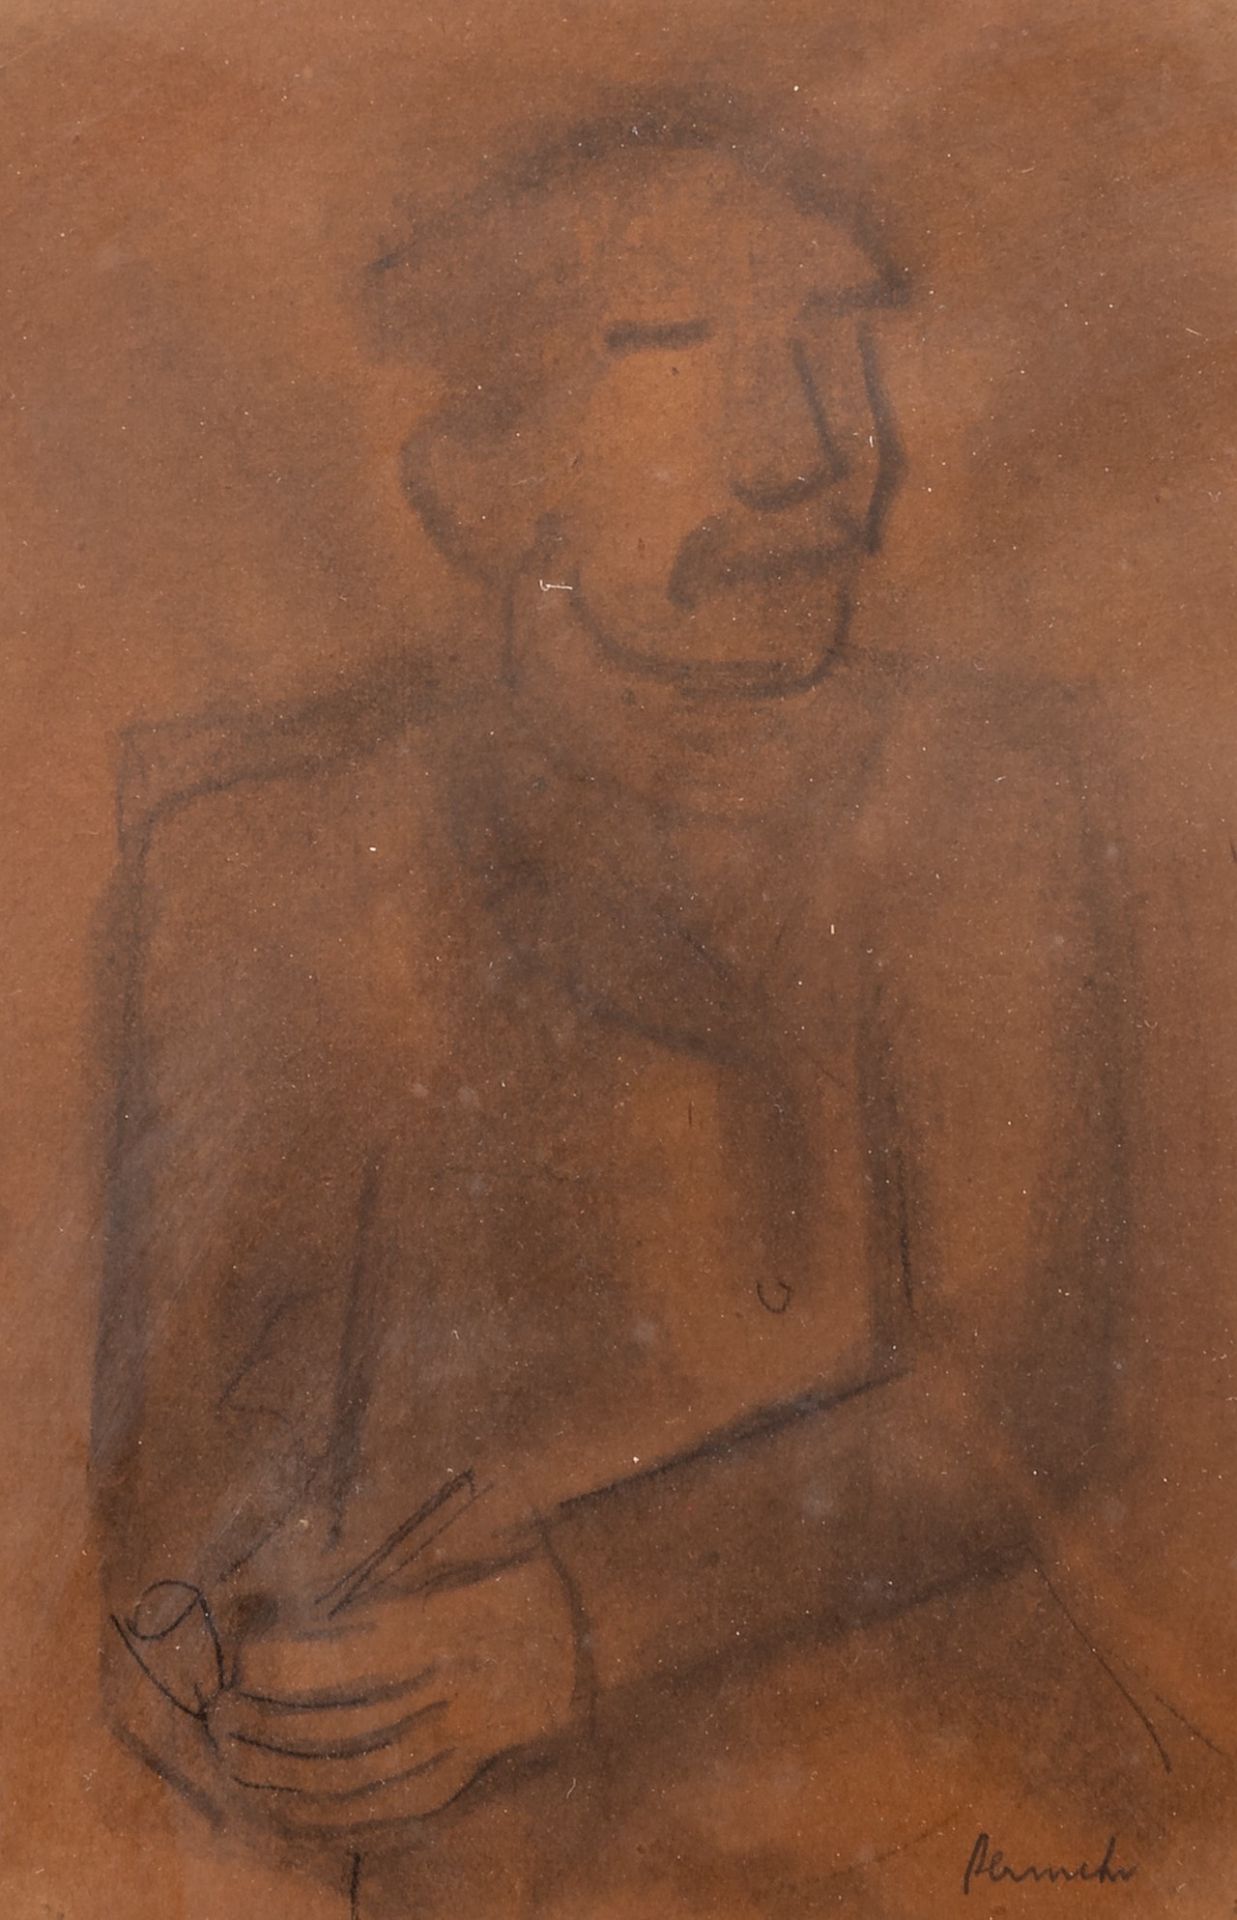 Constant Permeke (1886-1952), the pipe smoker, charcoal on paper 21 x 14 cm. (8.2 x 5.5 in.), Frame: